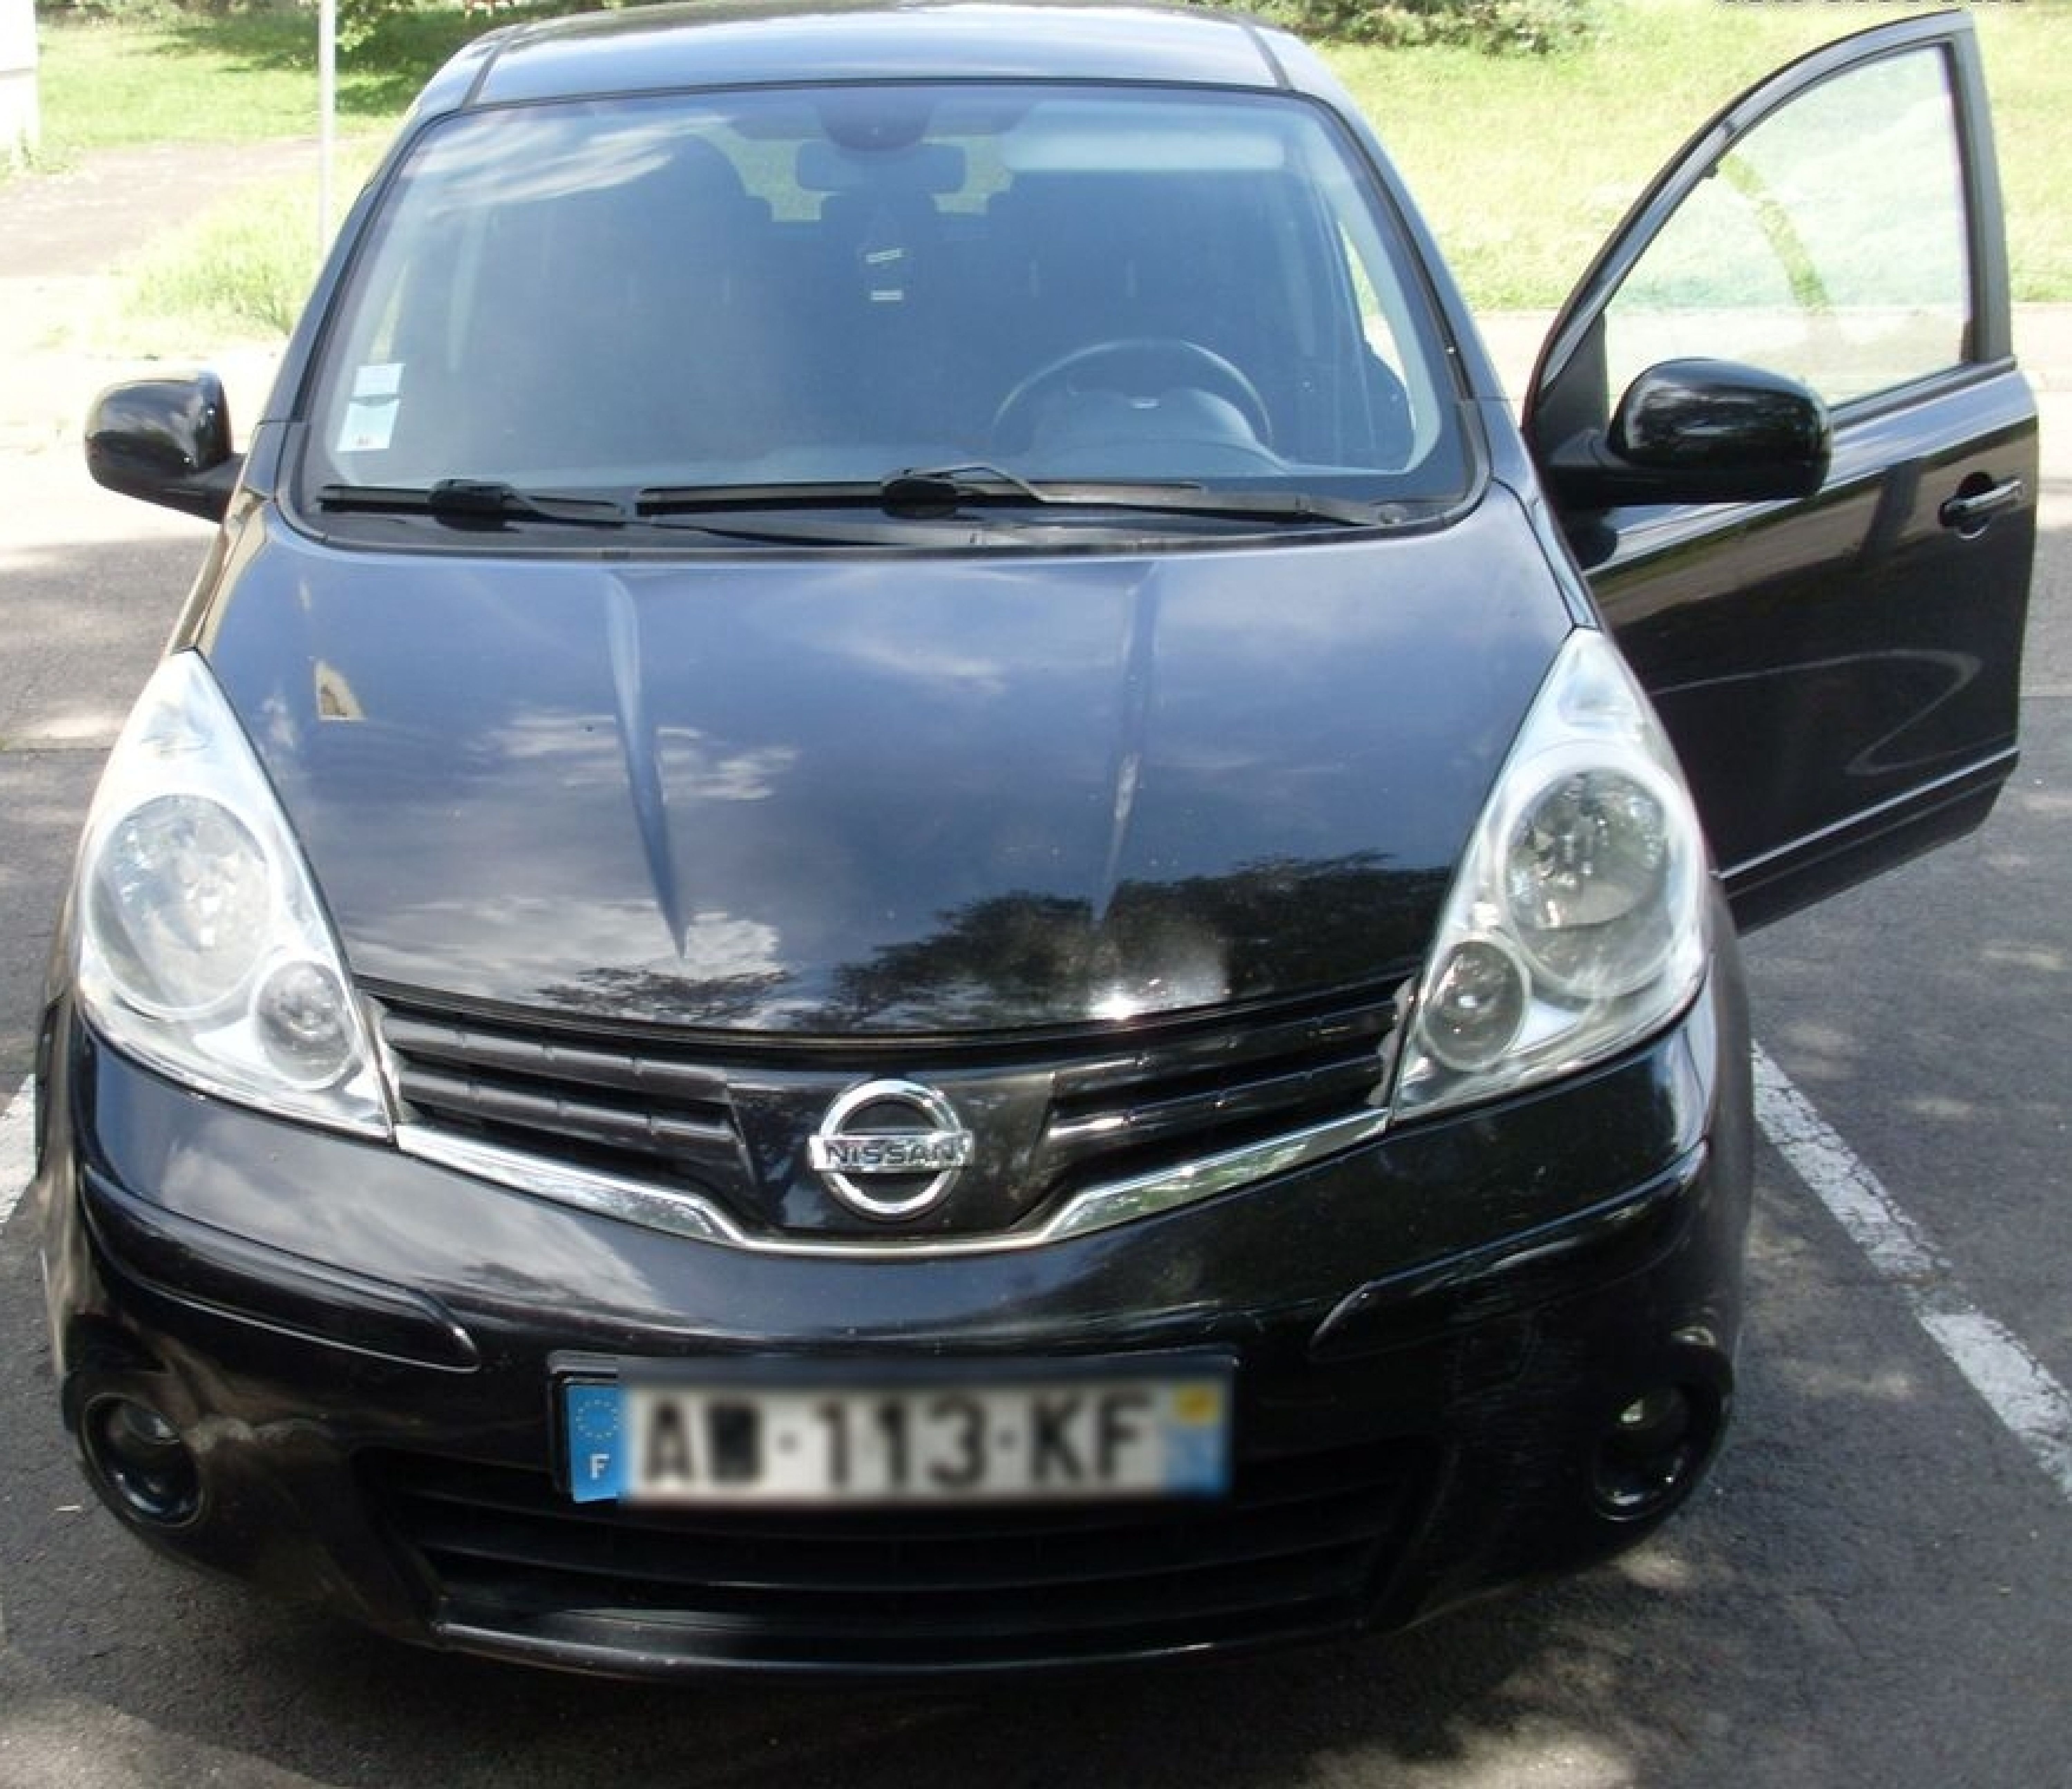 Nissan note, 1.5 dci - Photo 1